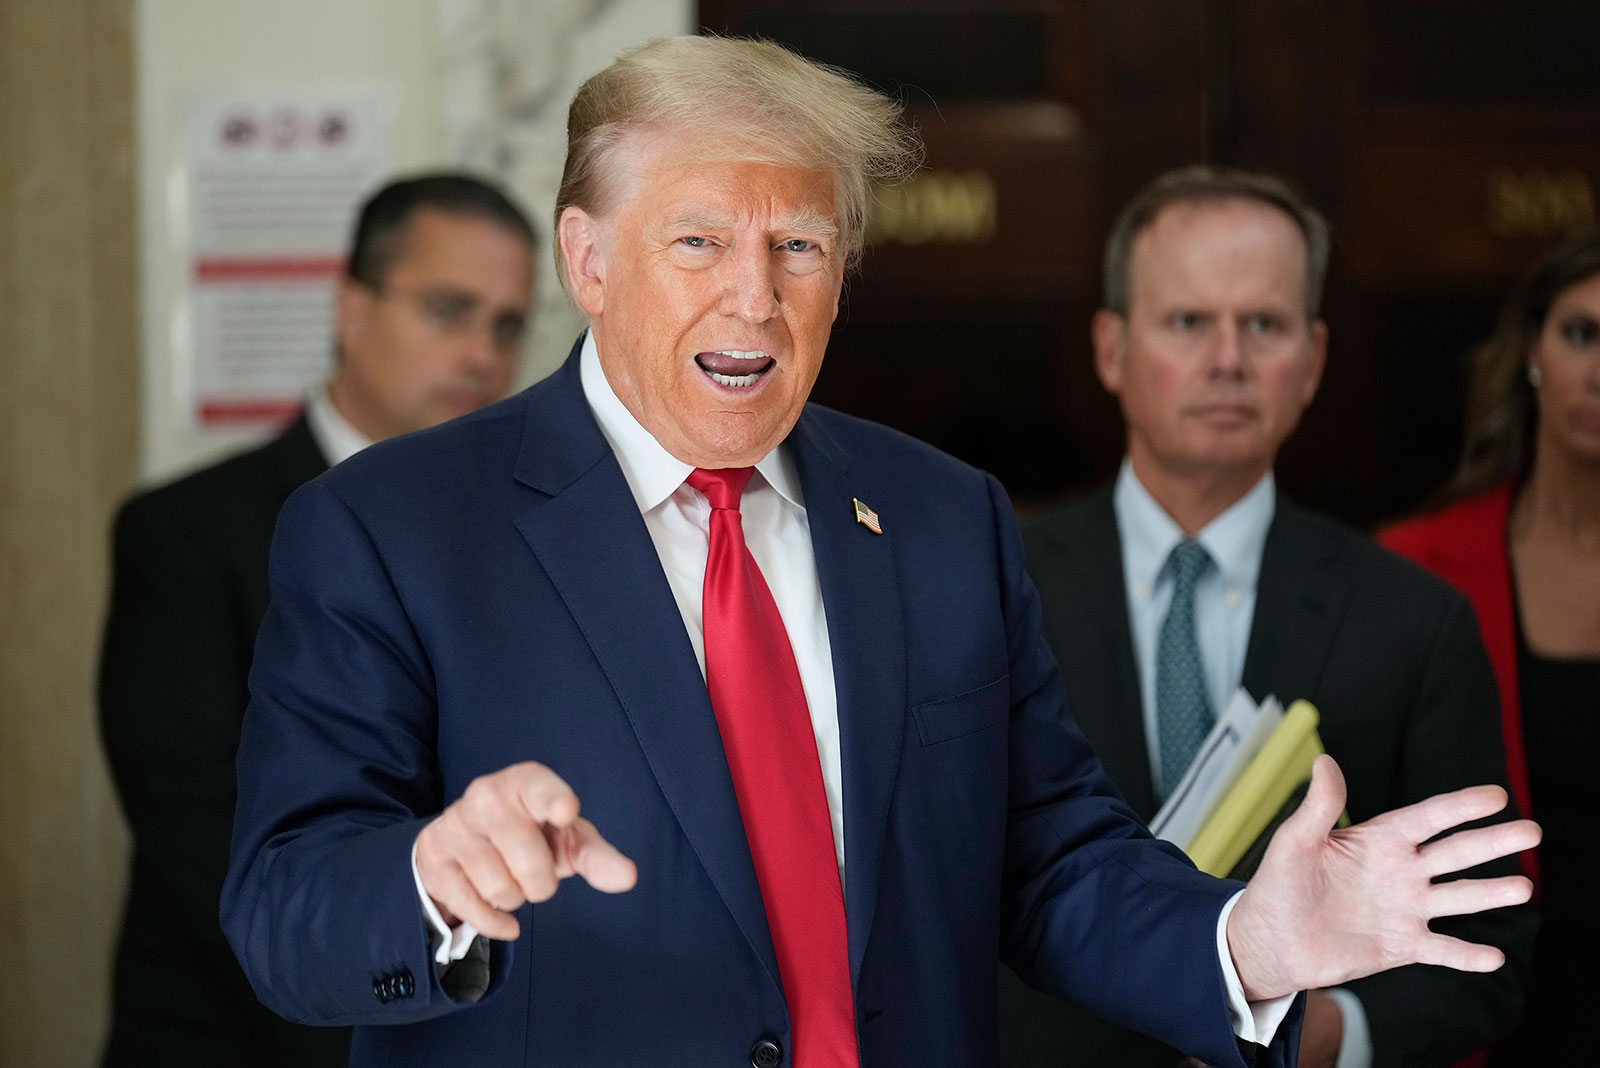 Former President Donald Trump speaks to the media during a break in his civil fraud trial in New York on Tuesday.